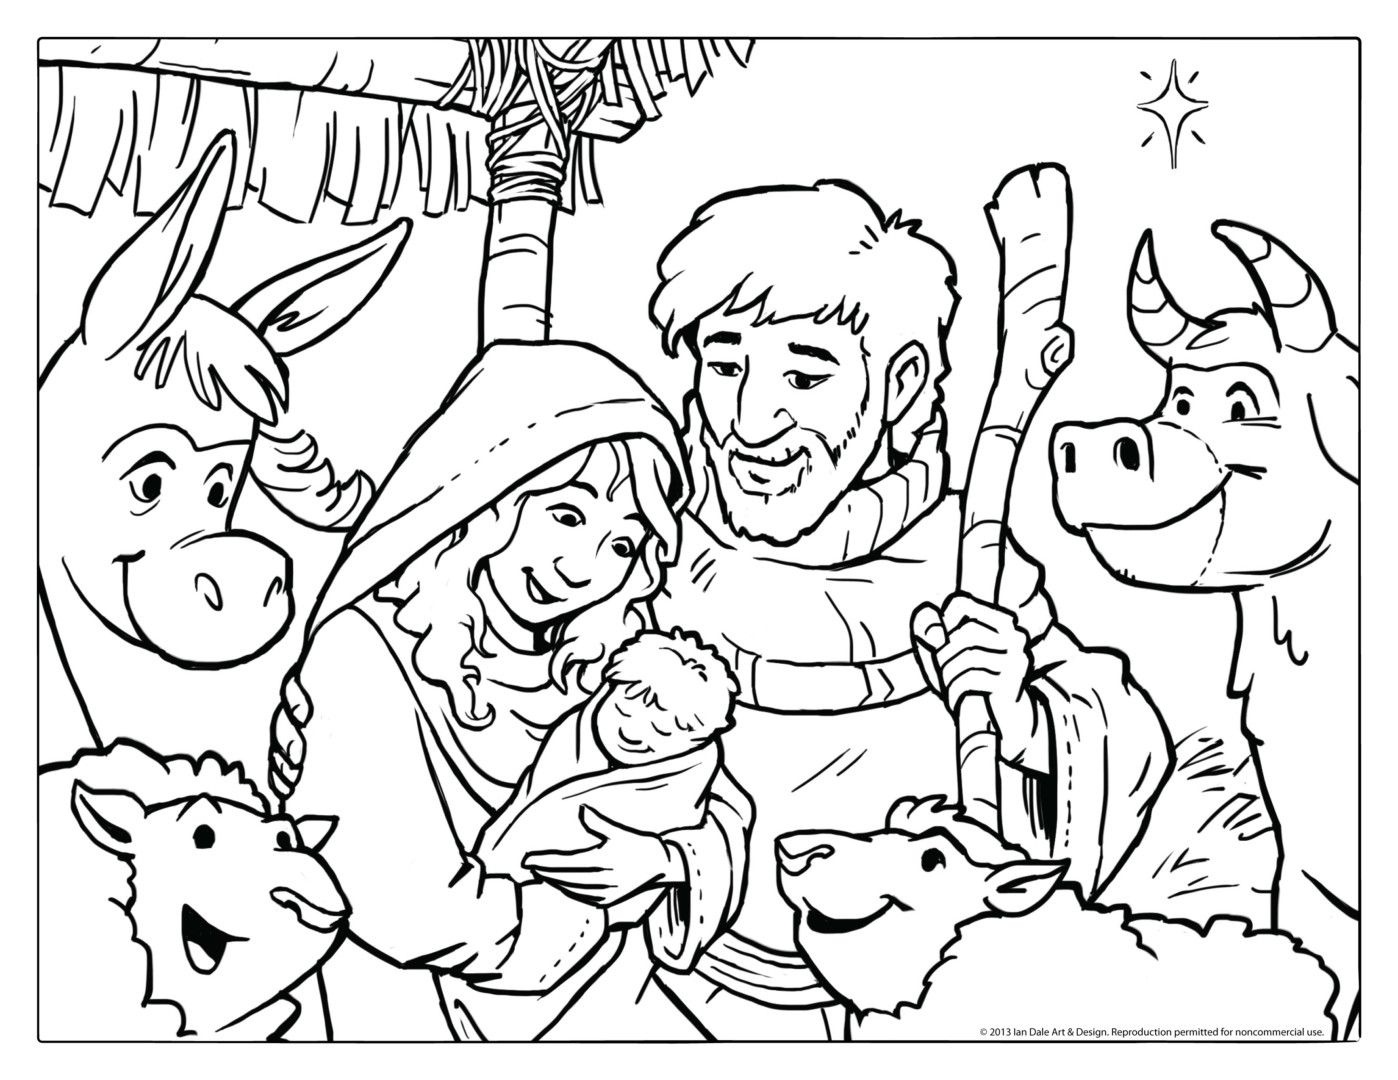 Coloring Pages Ideas: Nativity Scene Coloring Page. Precious Moments - Free Printable Pictures Of Nativity Scenes